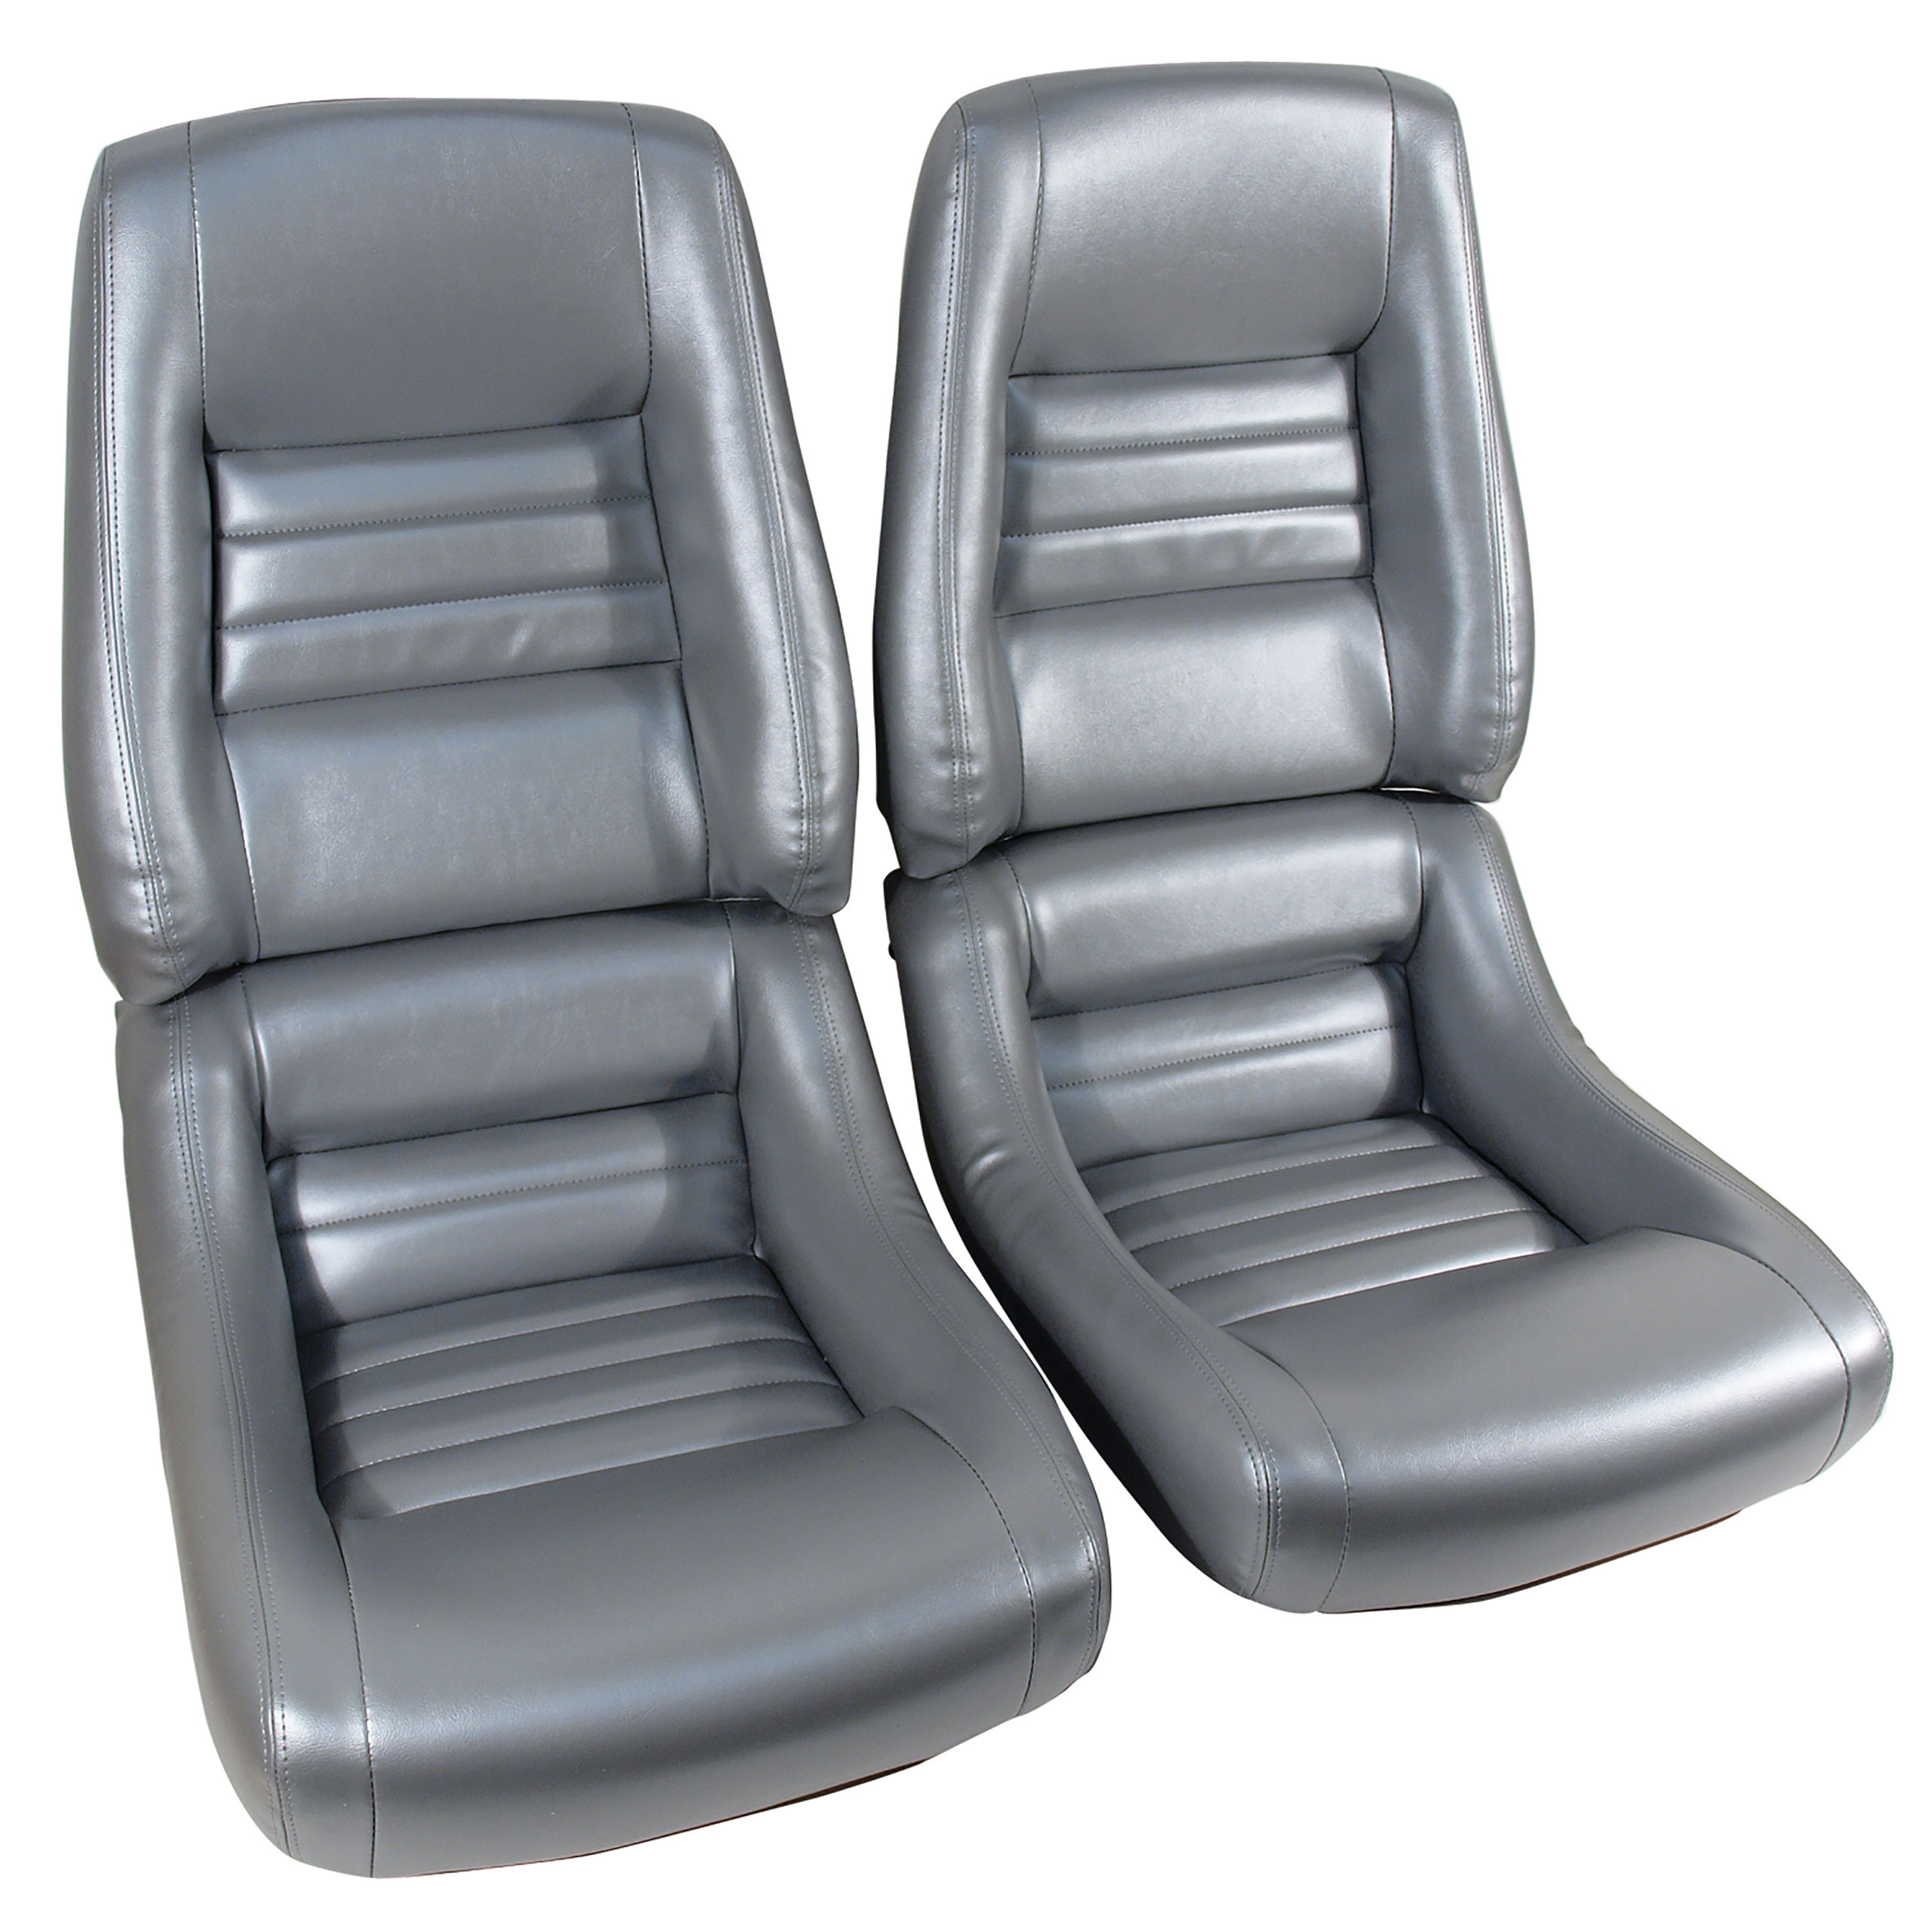 1978 Corvette C3 "Leather-Like" Vinyl Seat Covers Silver Pace 4" Bolster CA-421762 